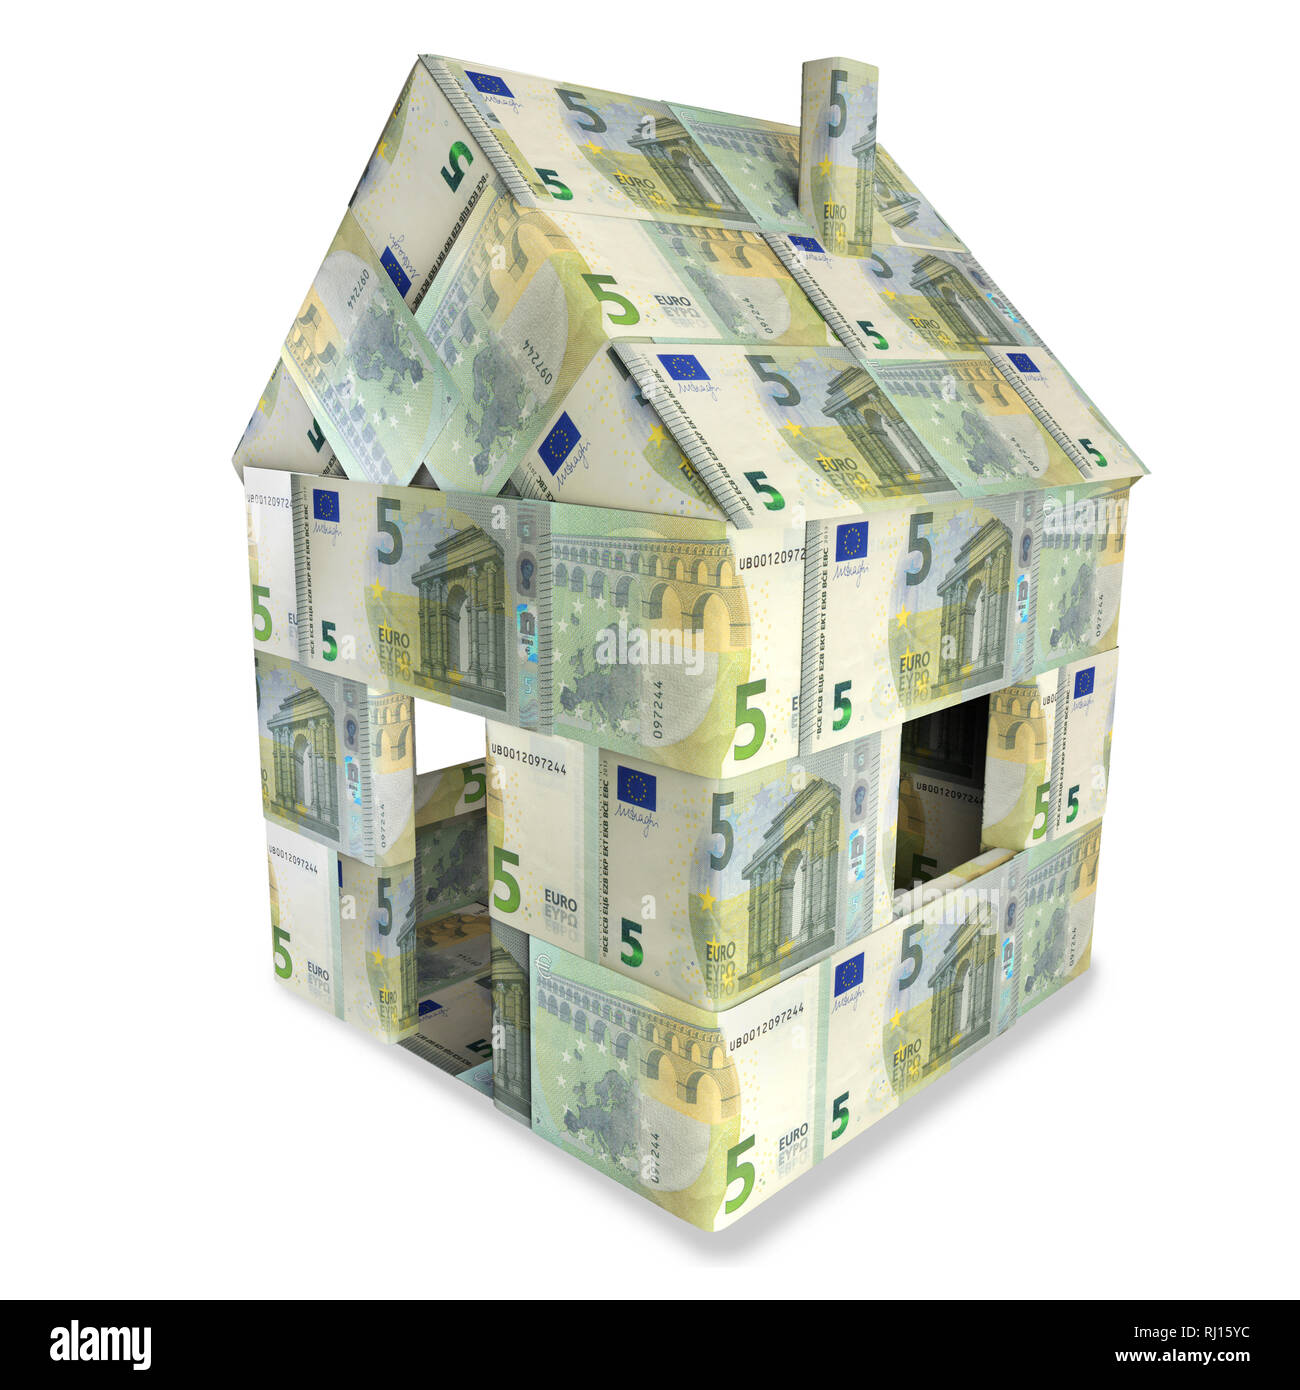 House made of 5 Euro notes an small money Stock Photo